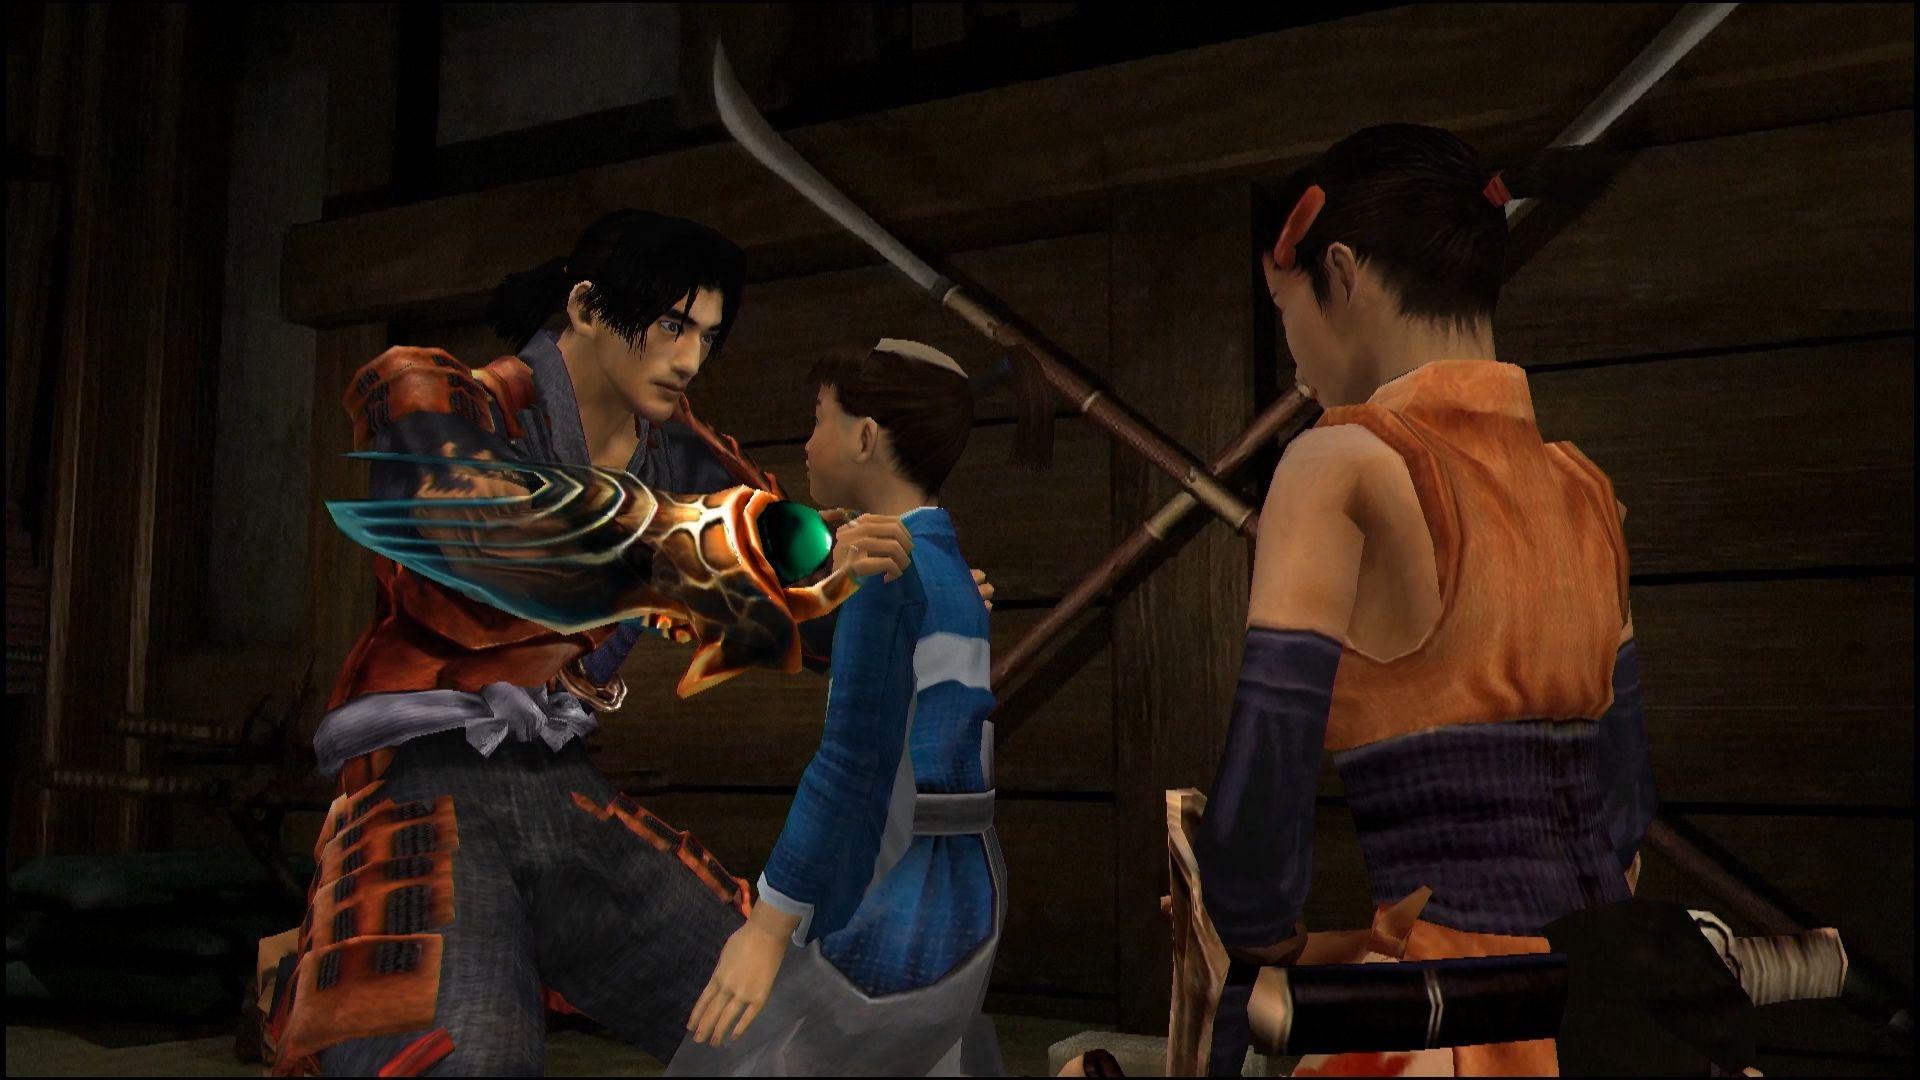 Onimusha Warlords: the remastero appears in the new trailer